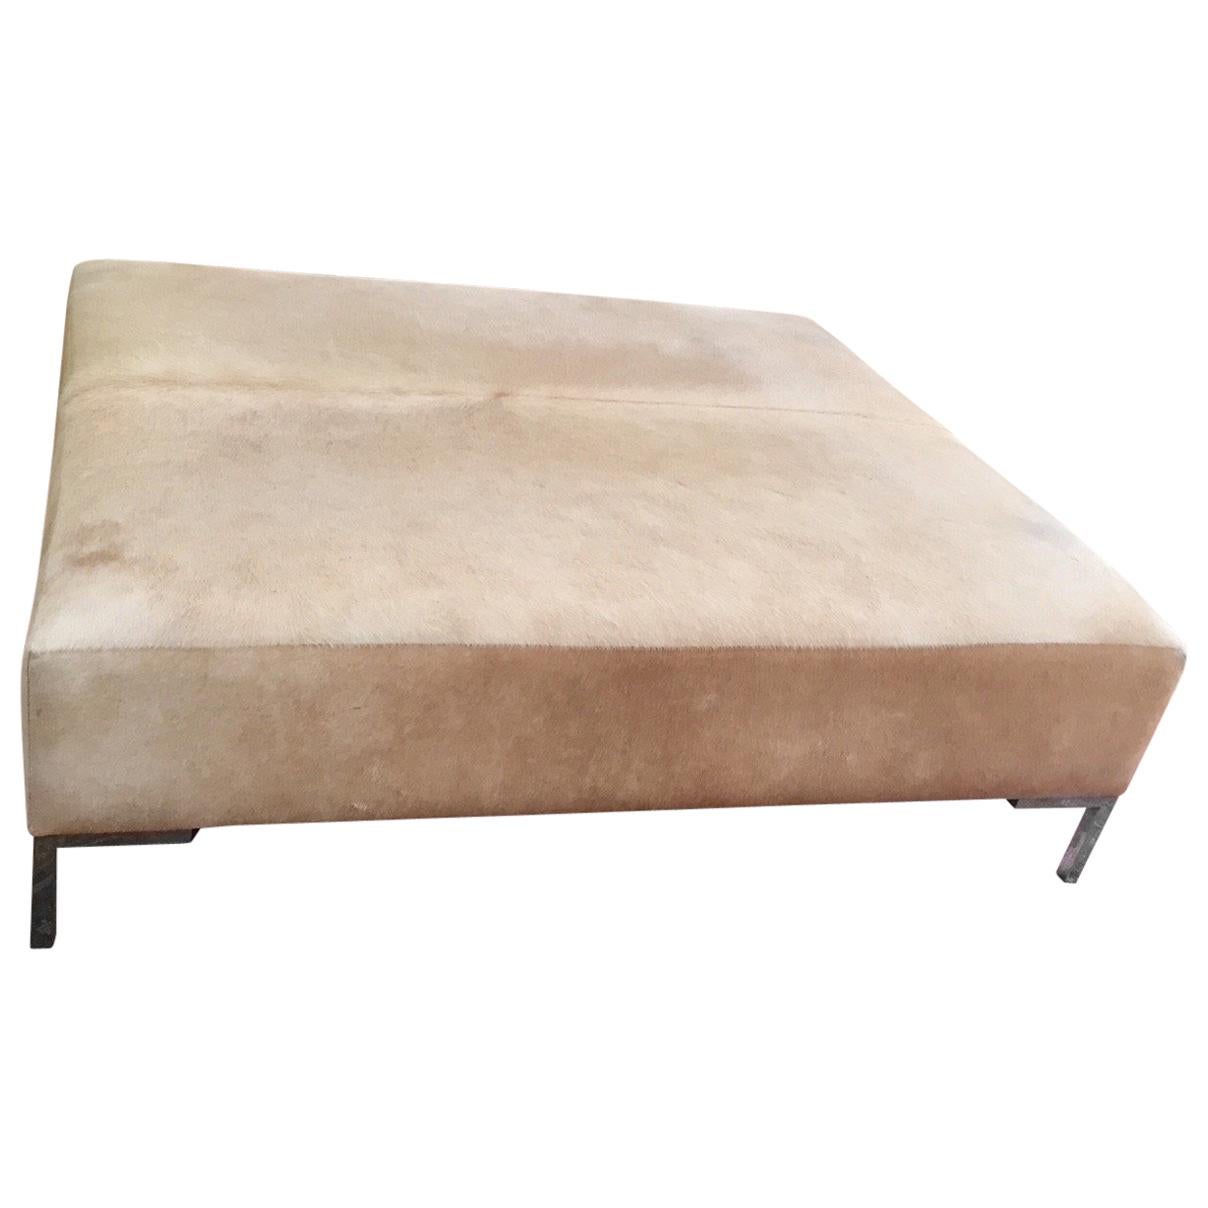 Super Cool Monumentally Large Cowhide Ottoman Coffee Table